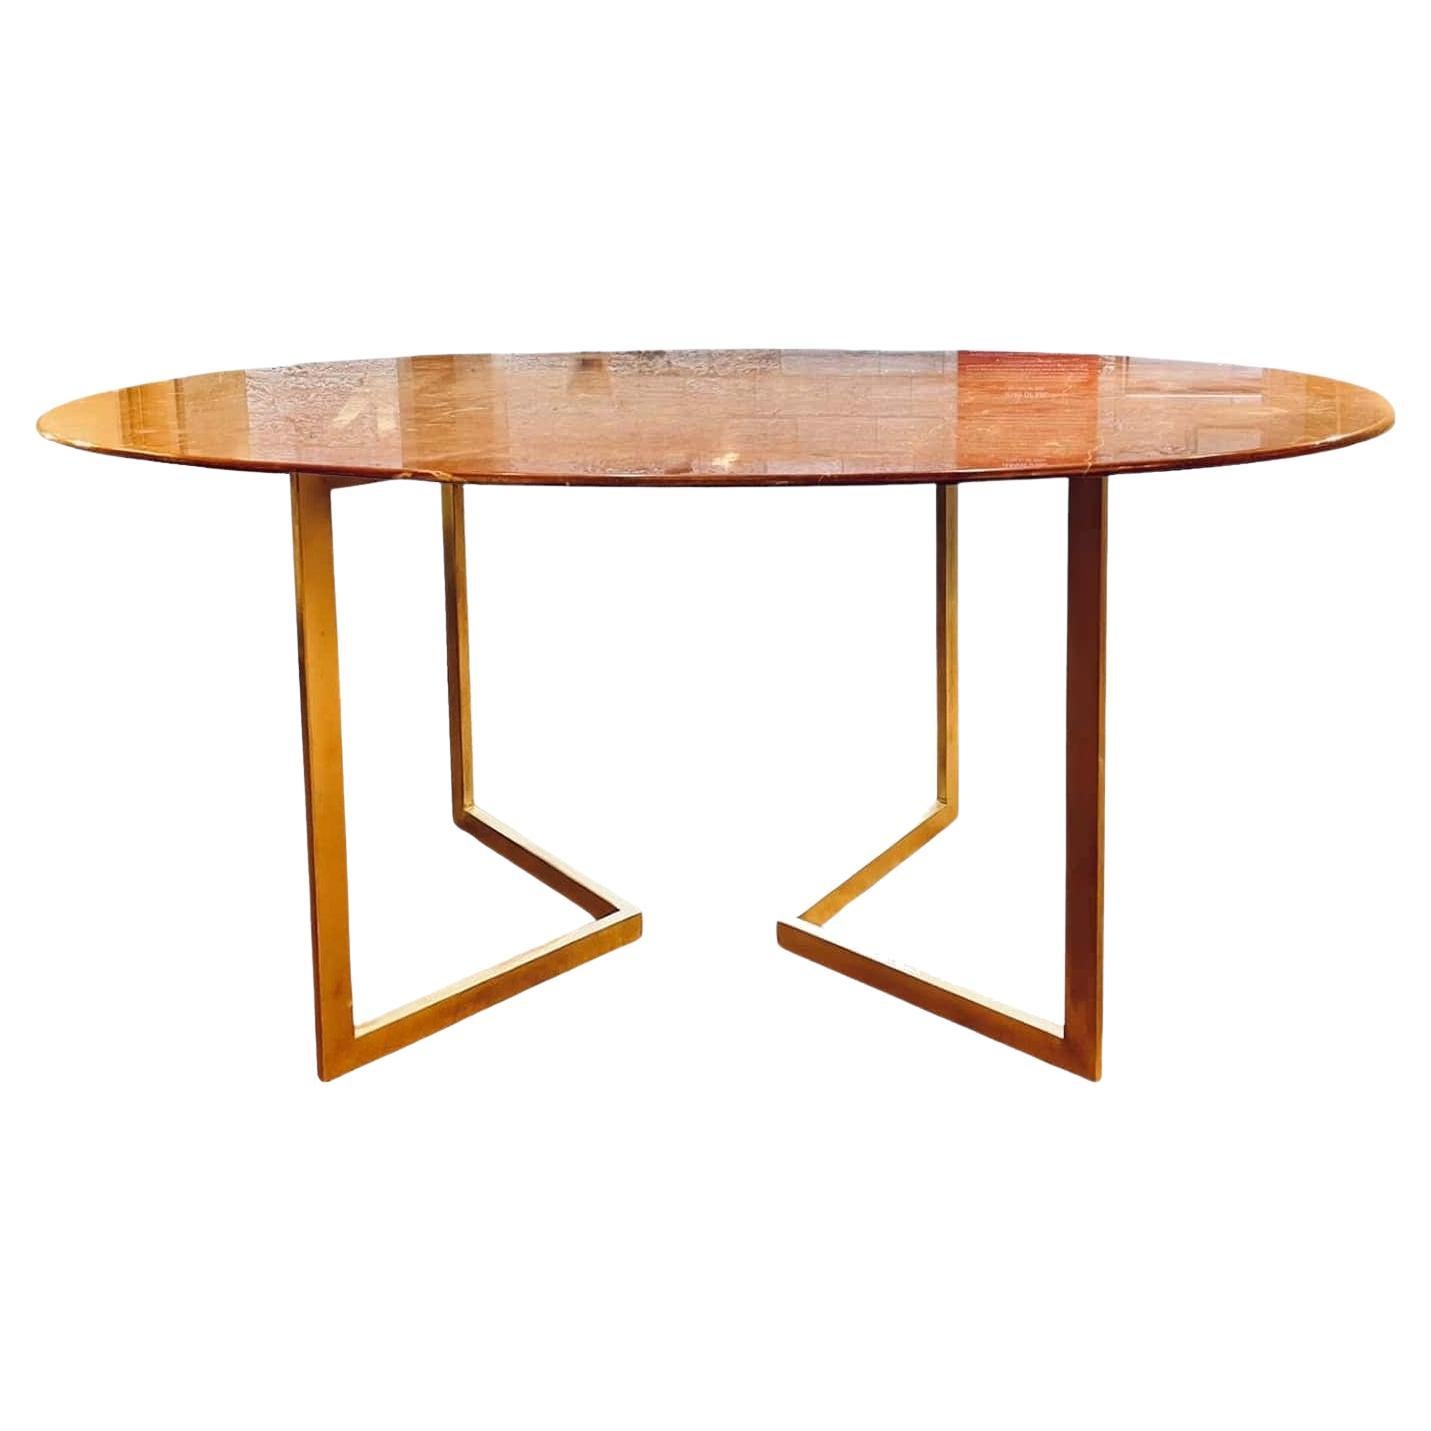 Italian 20th Century Red Alicante Marble Dining Table  For Sale